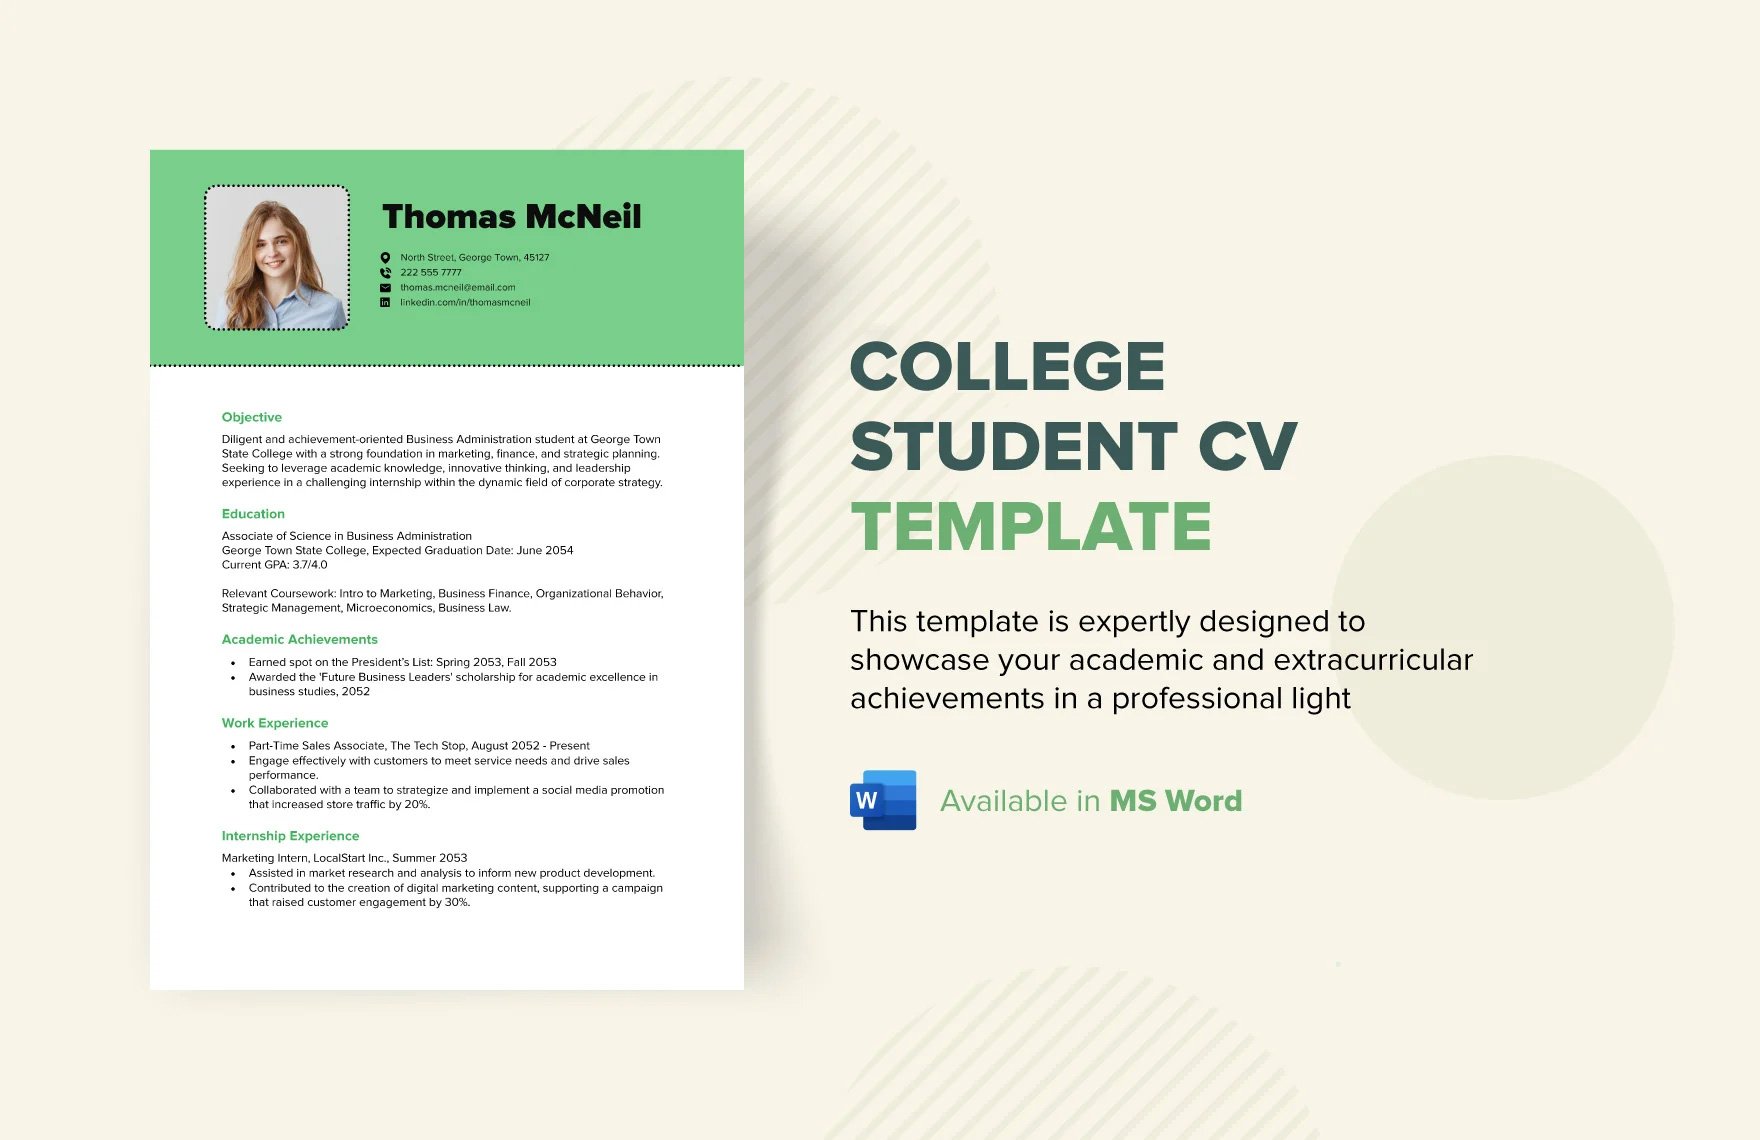 College Student CV Template